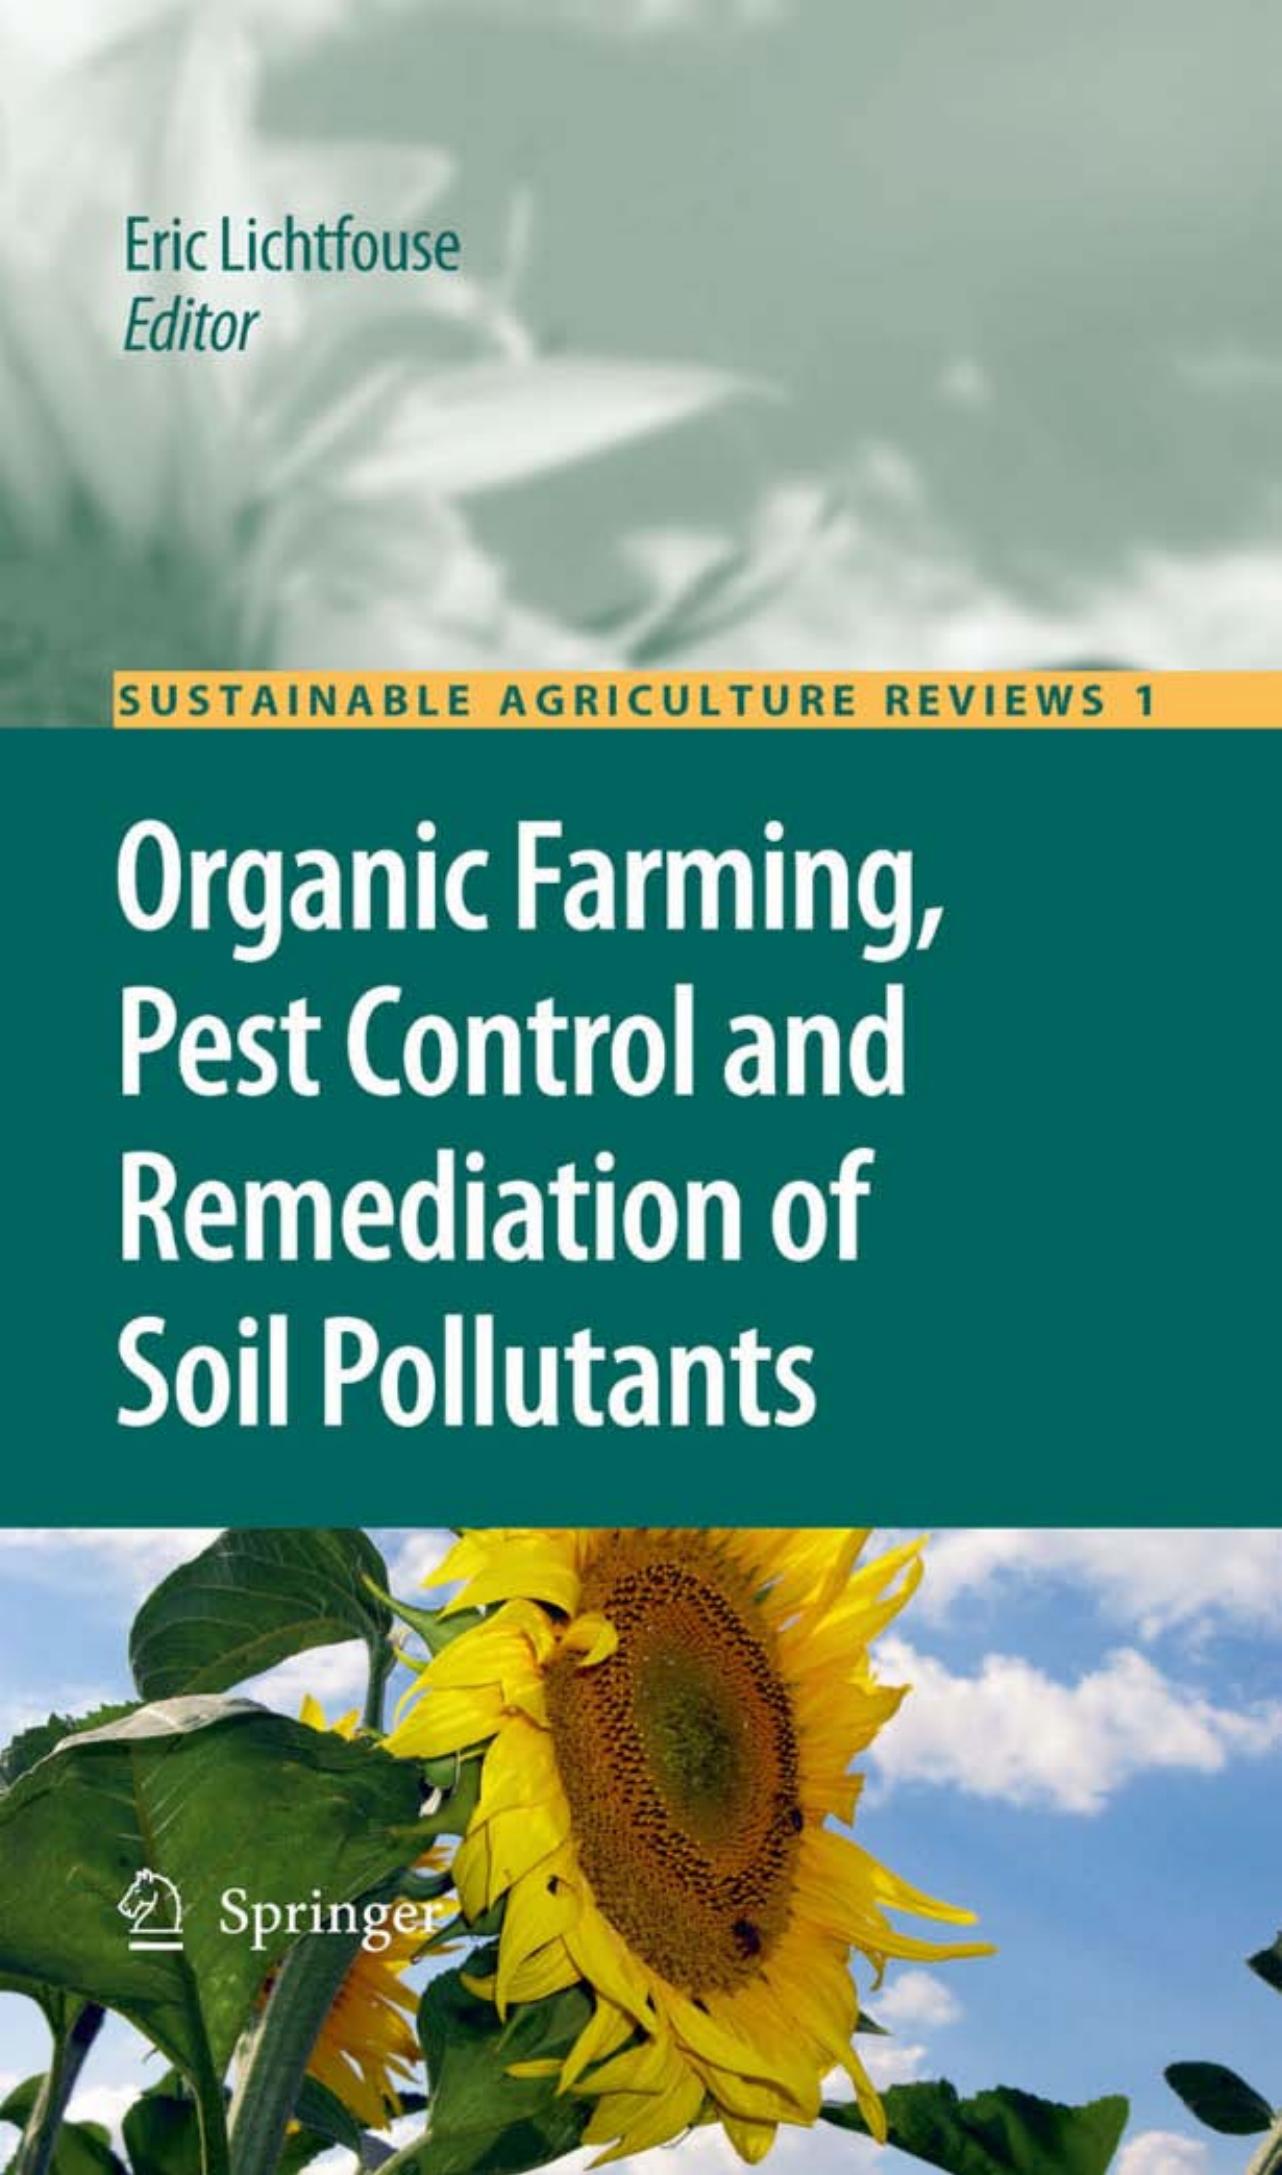 Organic Farming, Pest Control and Remediation of Soil Pollutants (Sustainable Agriculture Reviews, 1)